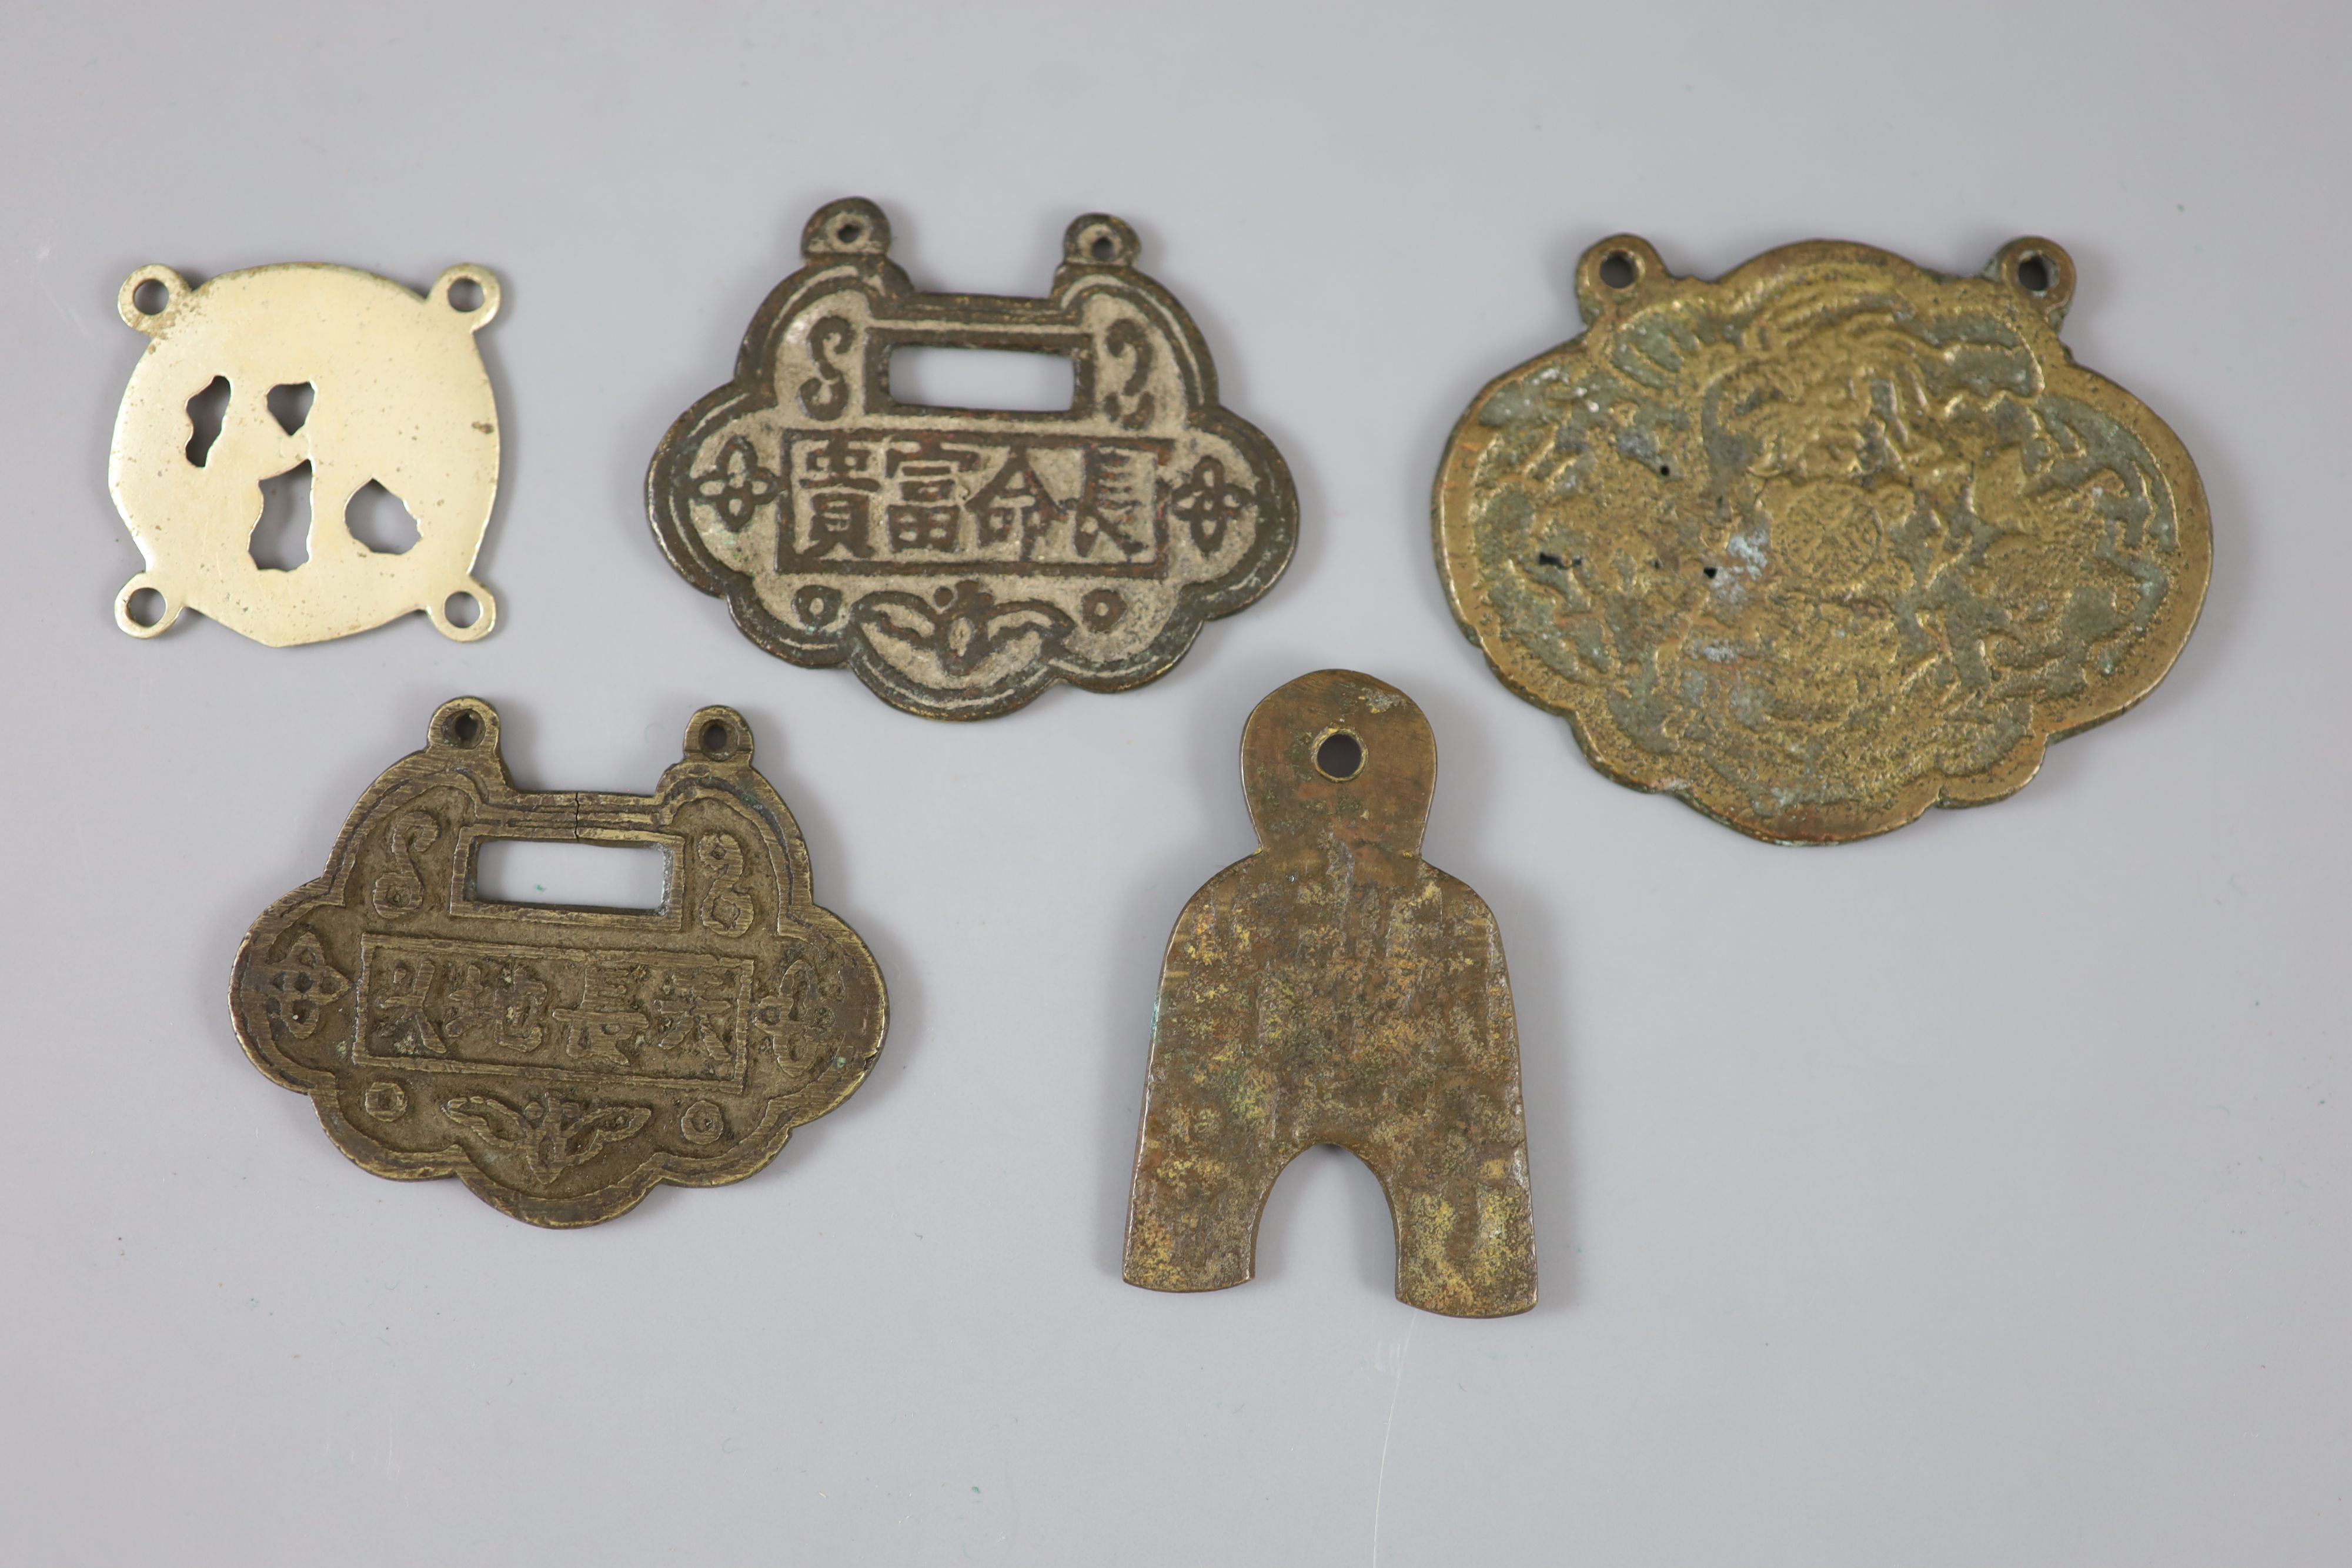 China, 5 bronze or brass charms or amulets, Qing dynasty-Republic period,